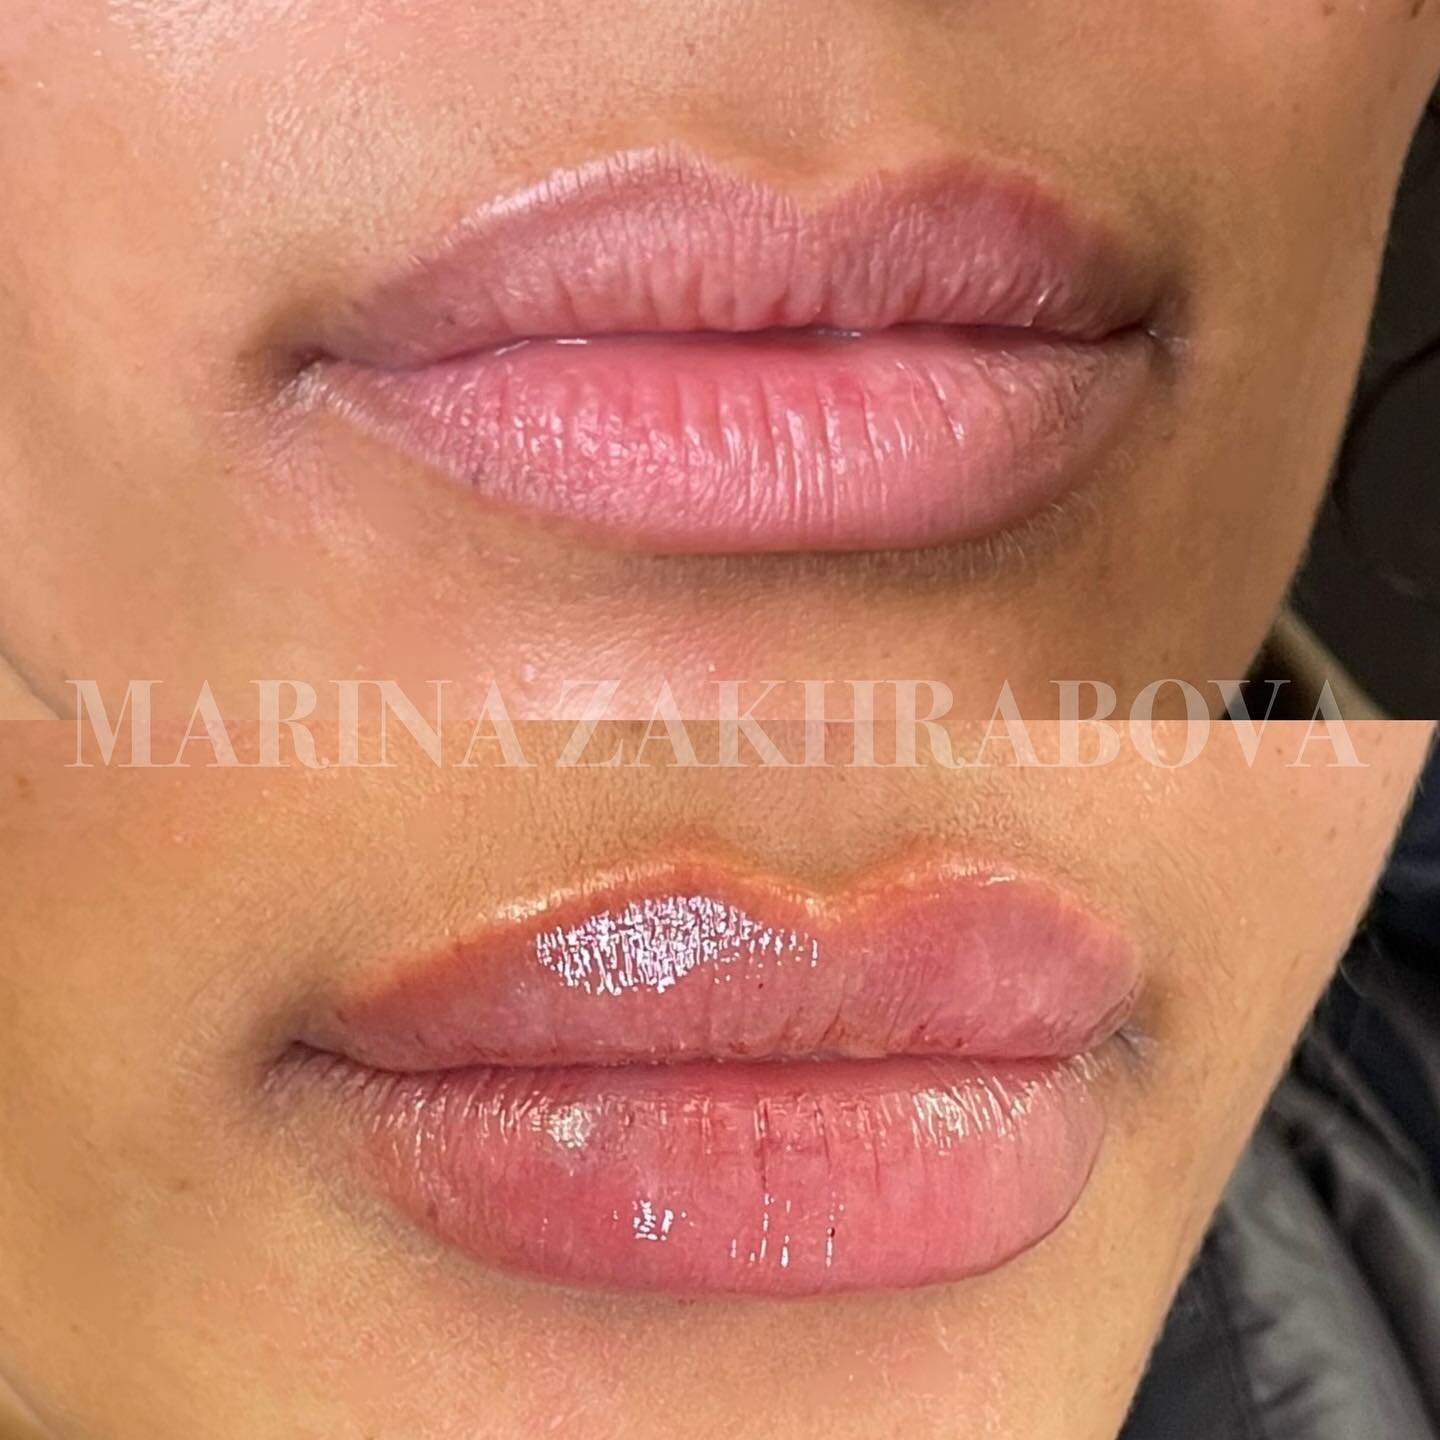 Adding hydration and definition with LIP FILLER 🫦💦

💉 Product: Restylane Kysse
⚖️ Amount: 1 mL
💵 Price: varies
📆 Longevity: up to 12 months
⏰ Appointment time: 30-45 minutes
❤️&zwj;🩹 Downtime: swelling and bruising will occur, please allow 2 we